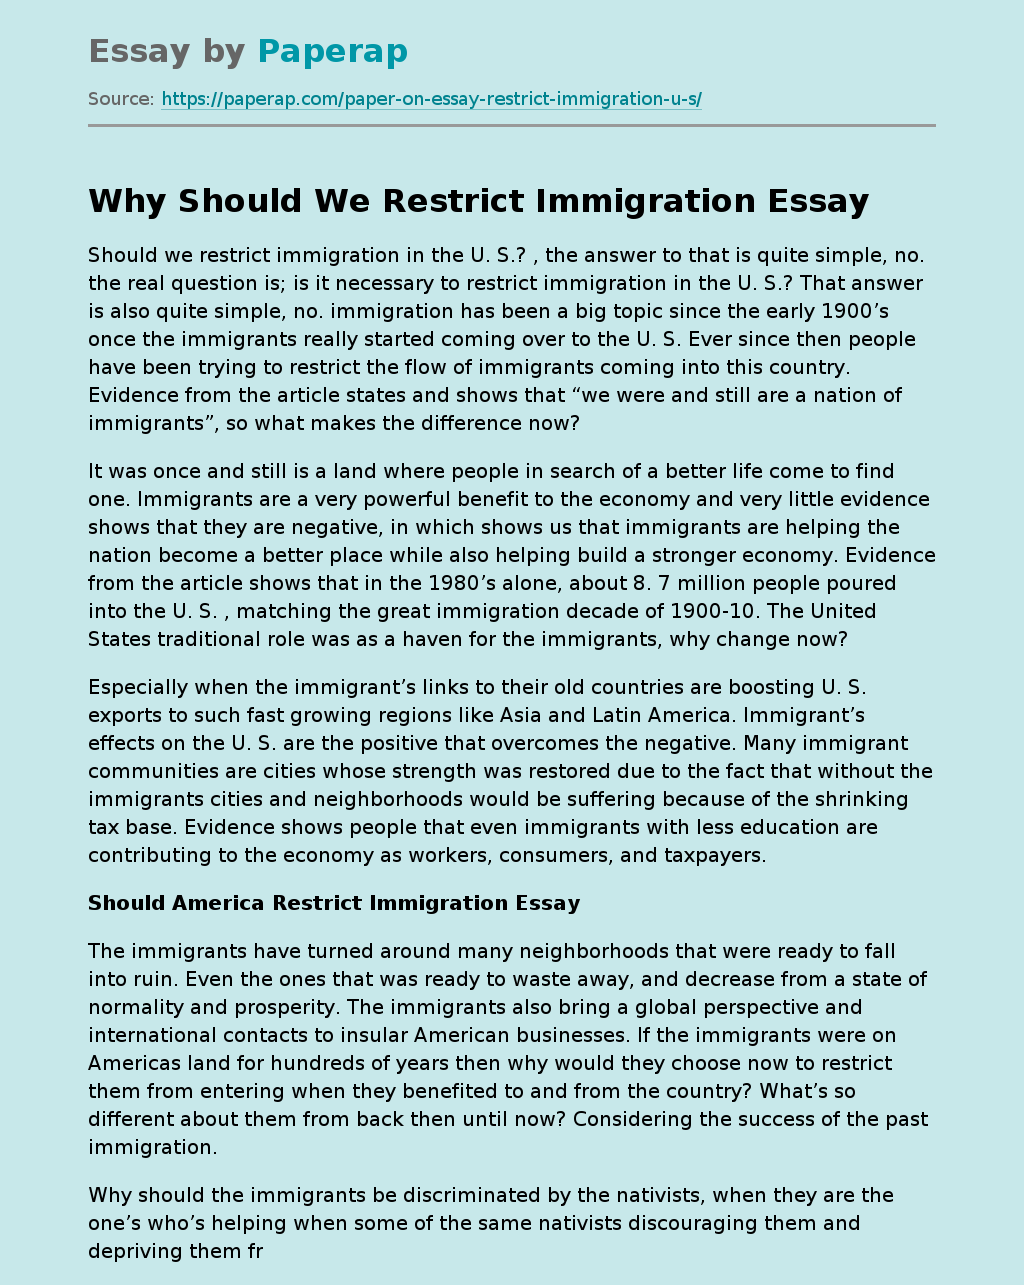 Why Should We Restrict Immigration